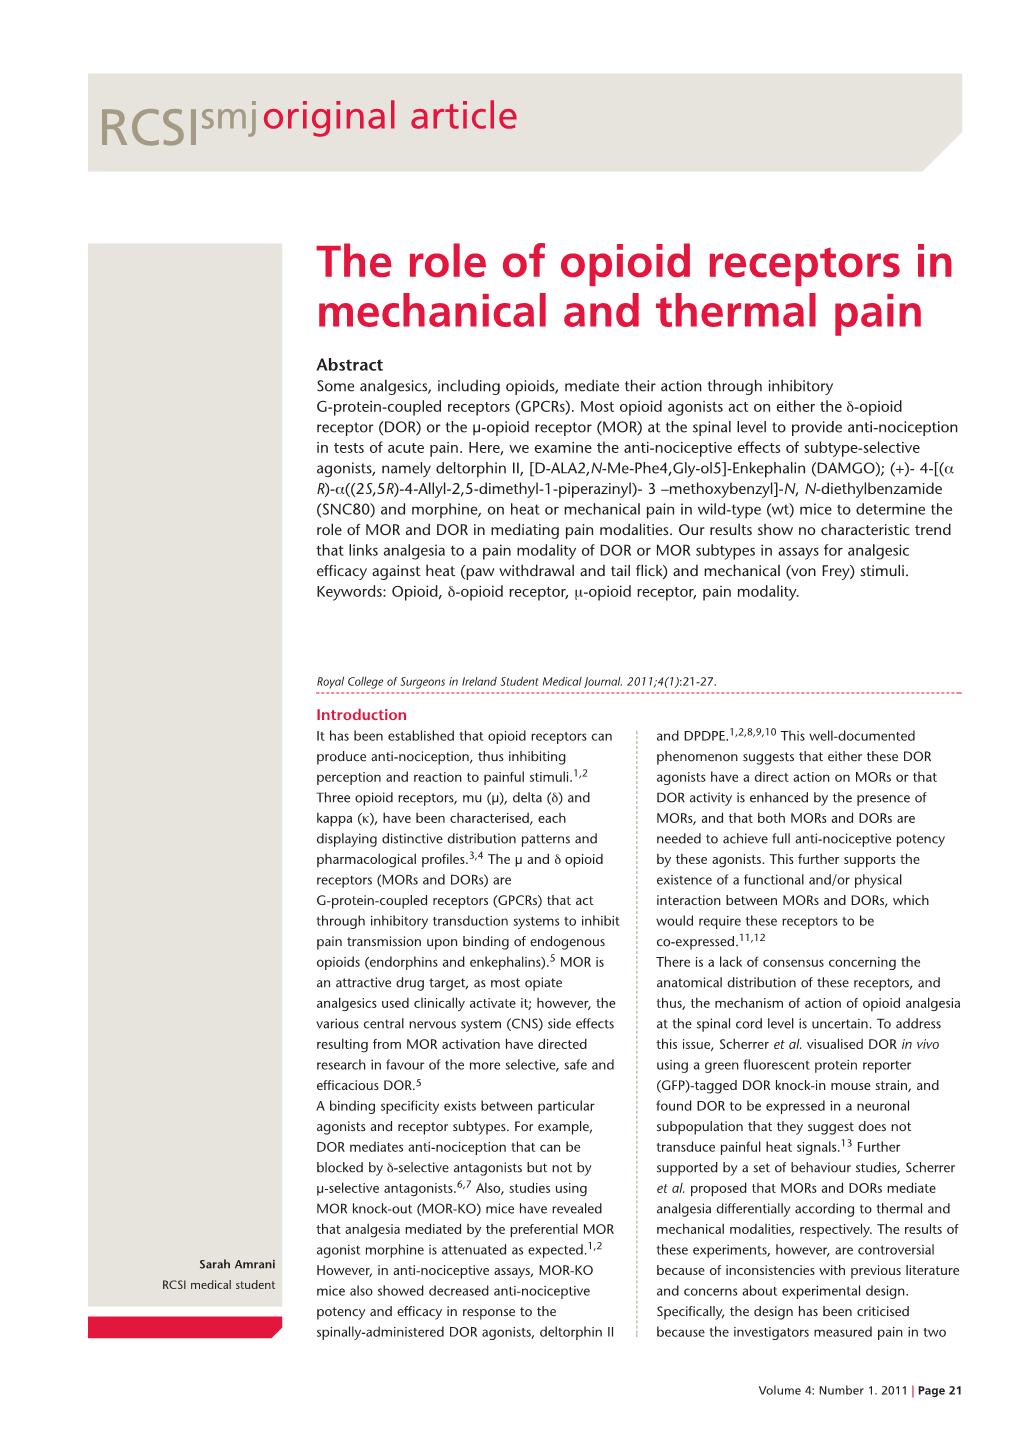 The Role of Opioid Receptors in Mechanical and Thermal Pain